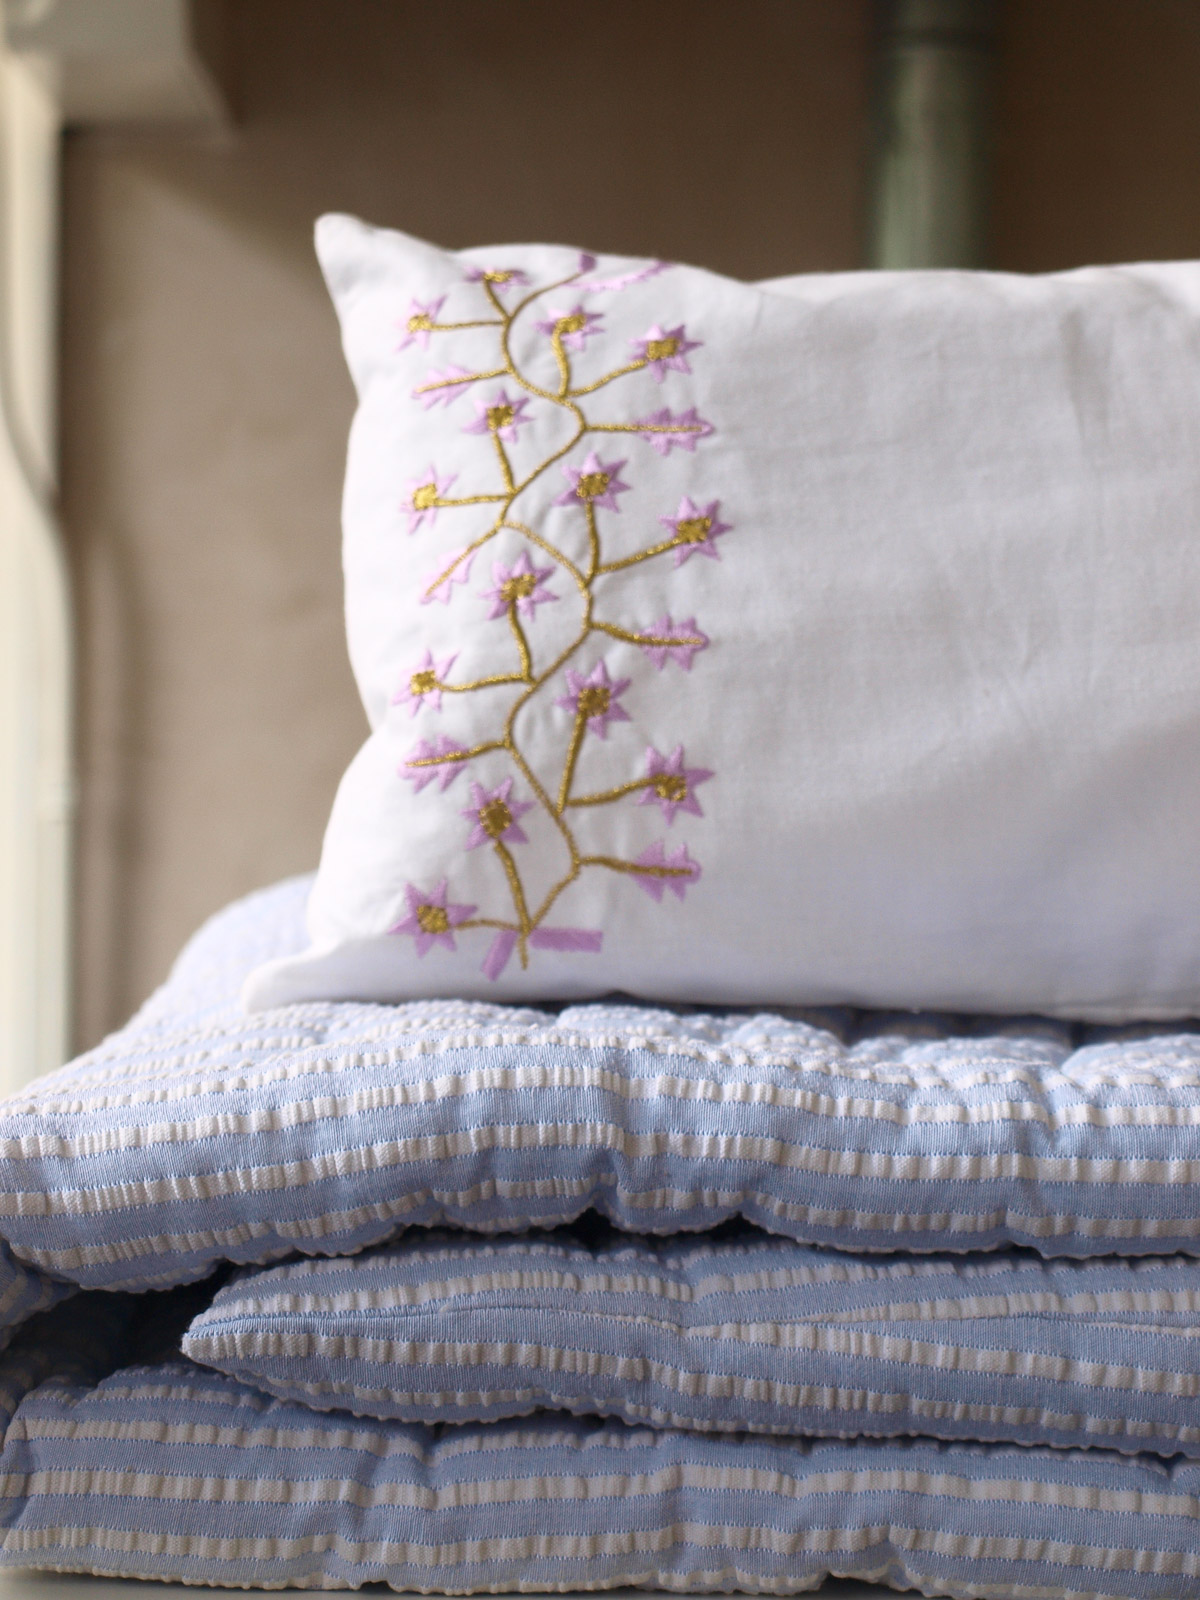 embroidered pillow 41x27 cm - 1031